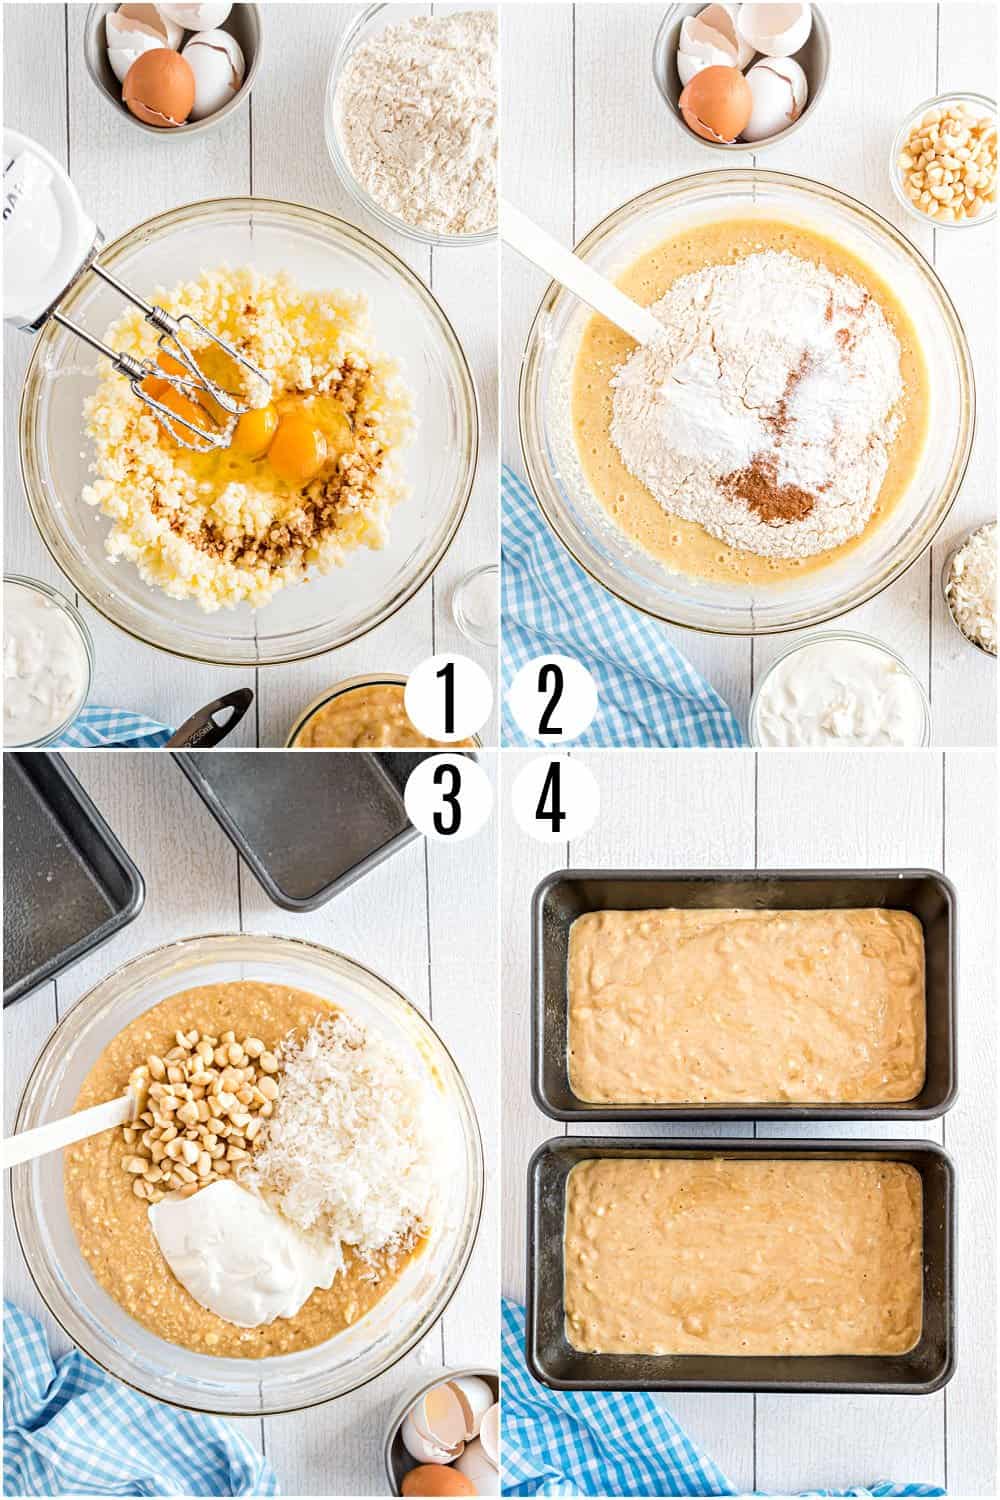 Step by step photos showing how to make coconut banana bread.